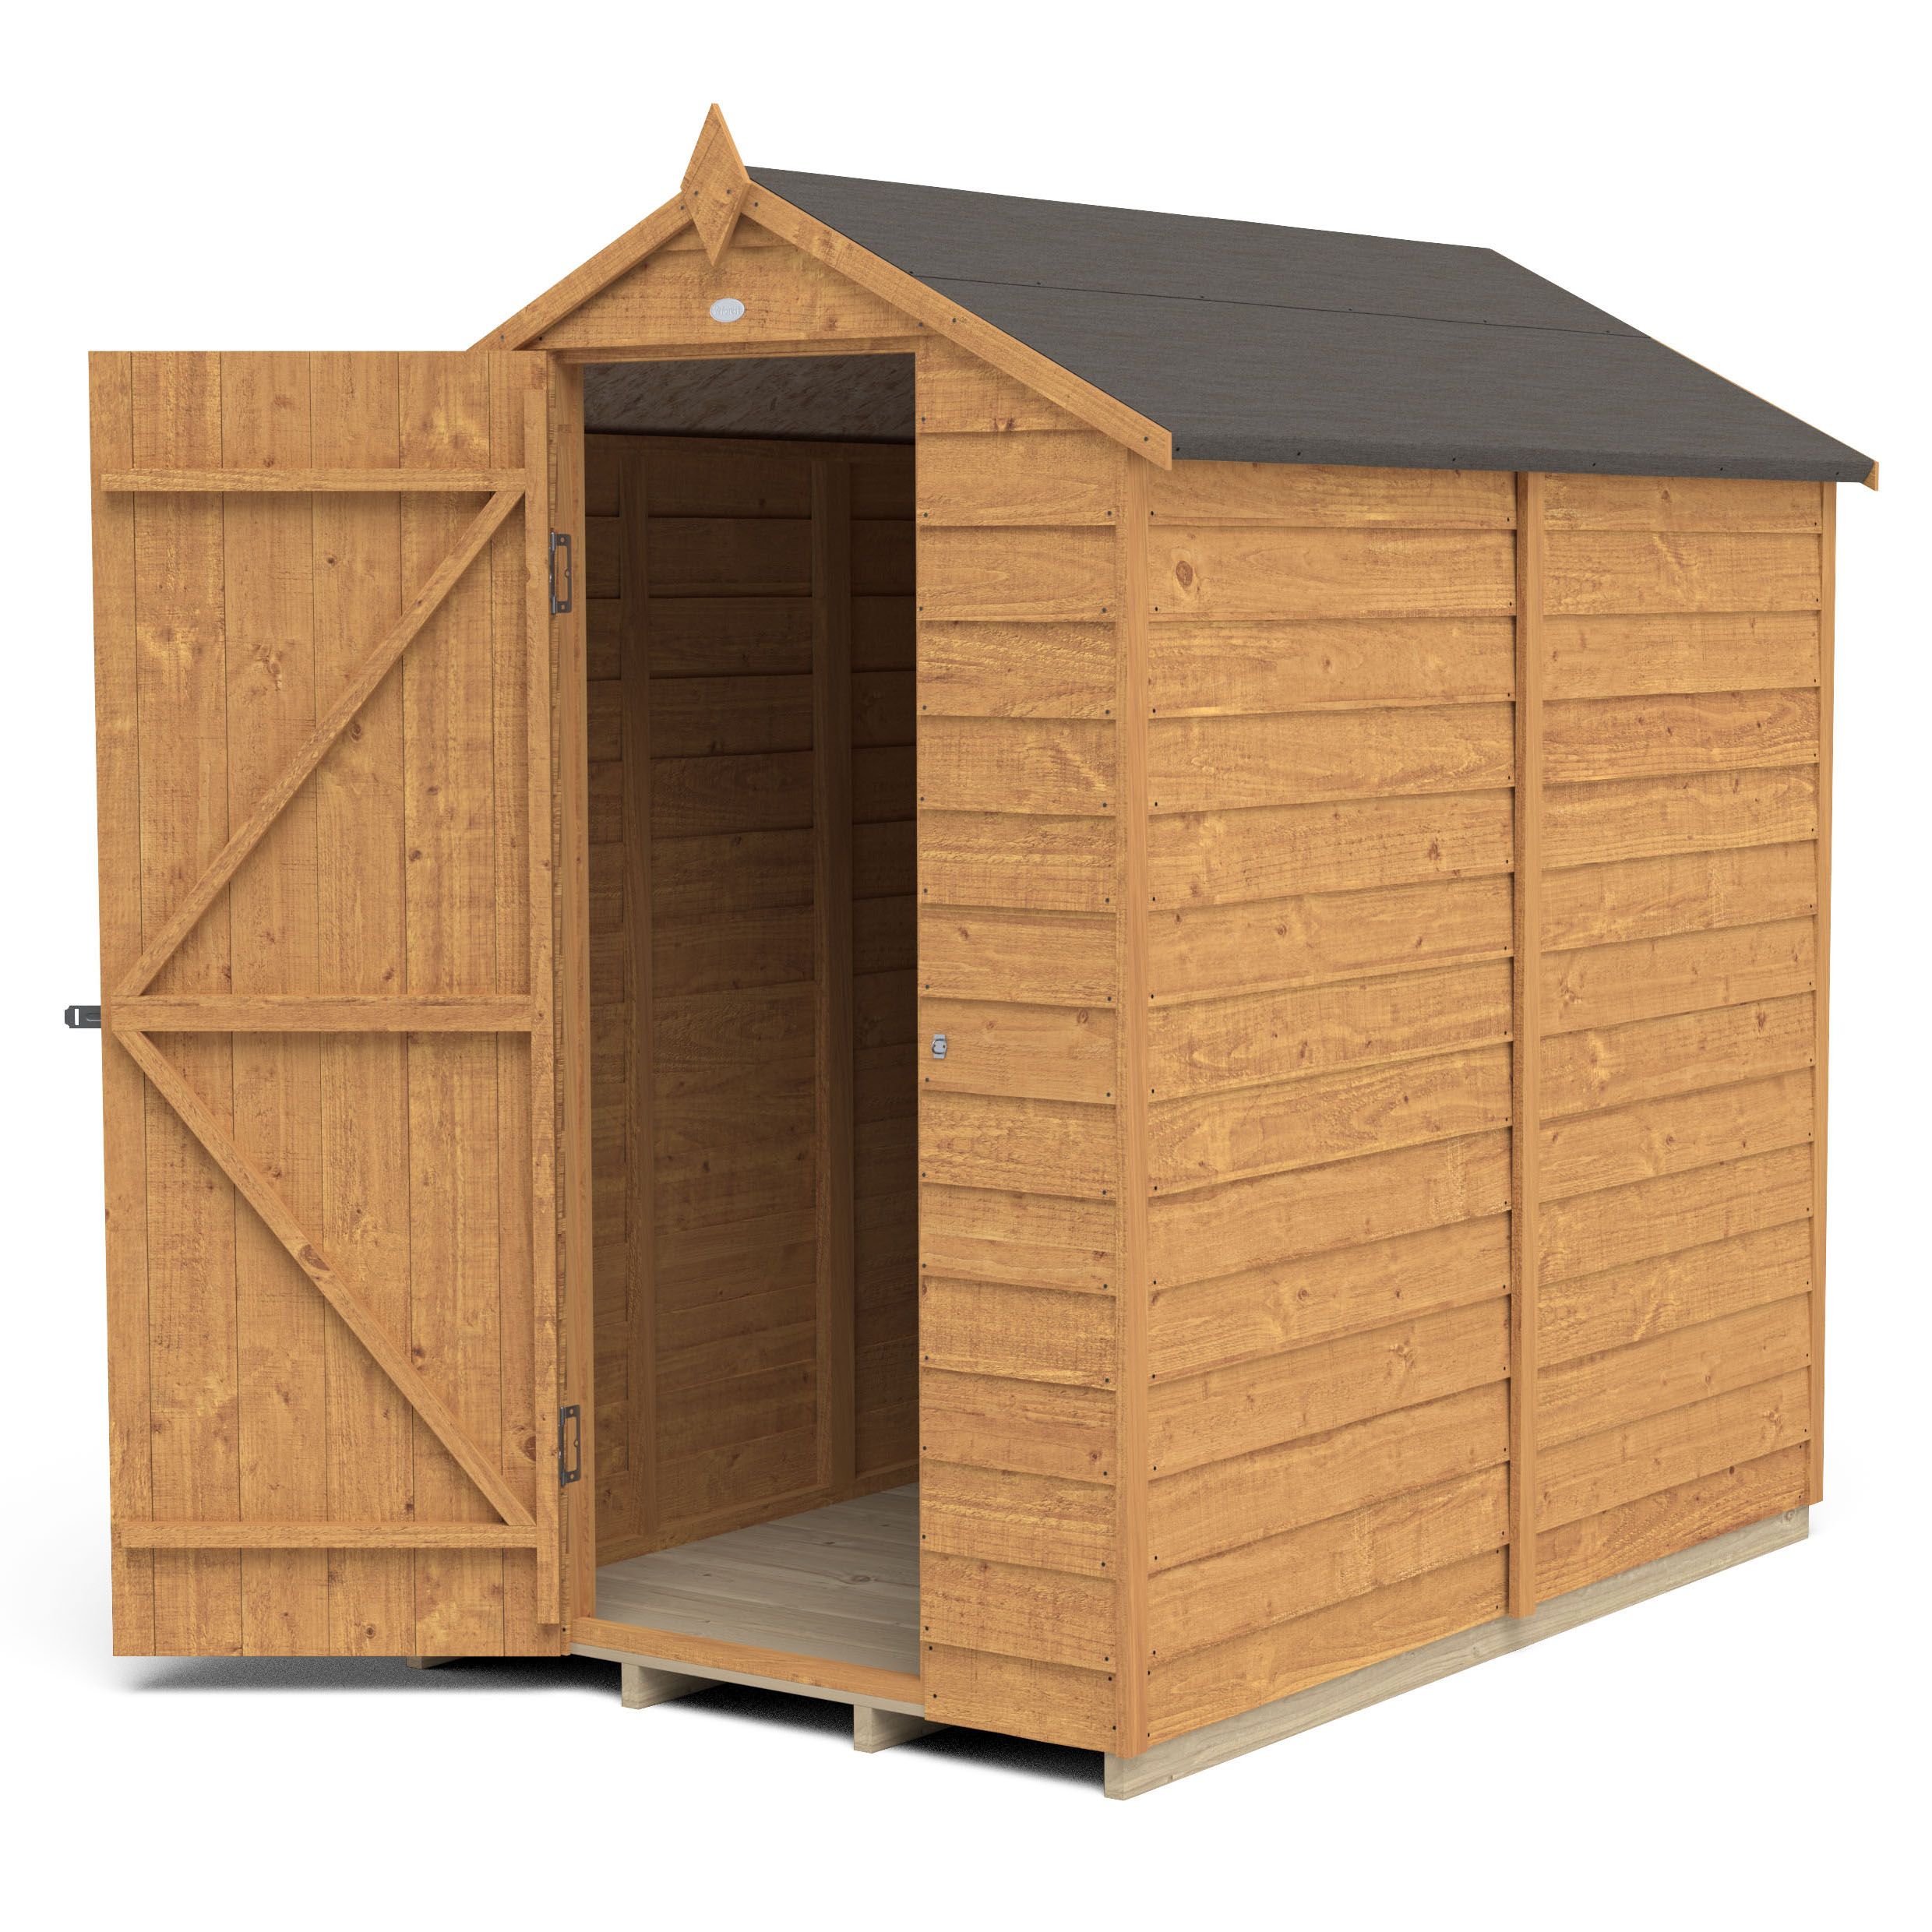 Forest Garden Overlap 6x4 ft Apex Wooden Dip treated Shed with floor - Assembly service included